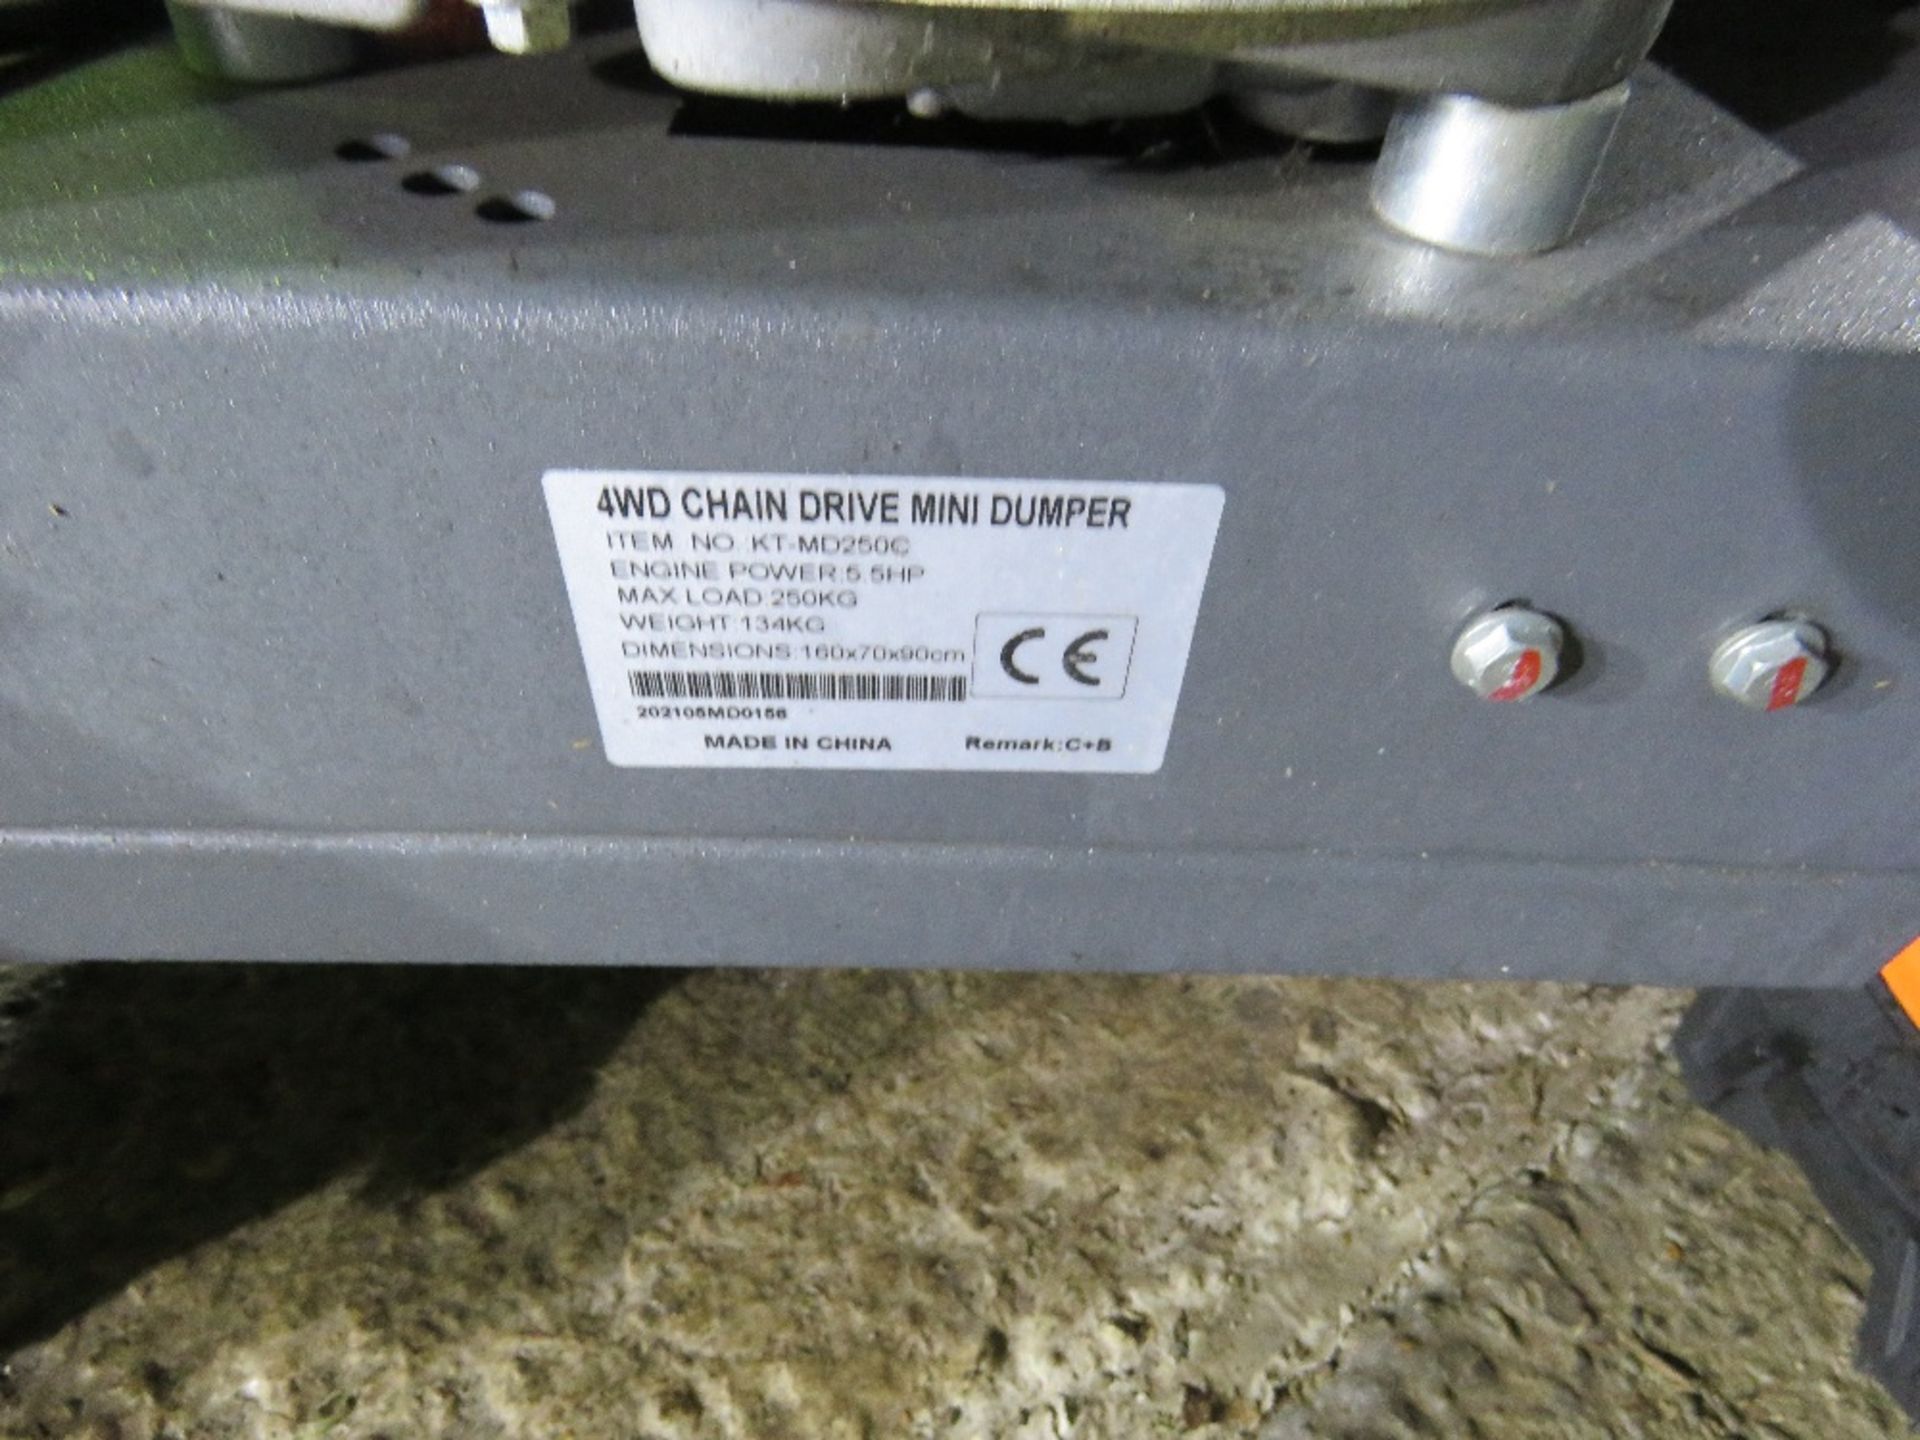 KTMD250C PETROL ENGINED 4WD CHAIN DRIVEN POWER BARROW, APPEARS UNUSED. - Image 10 of 13